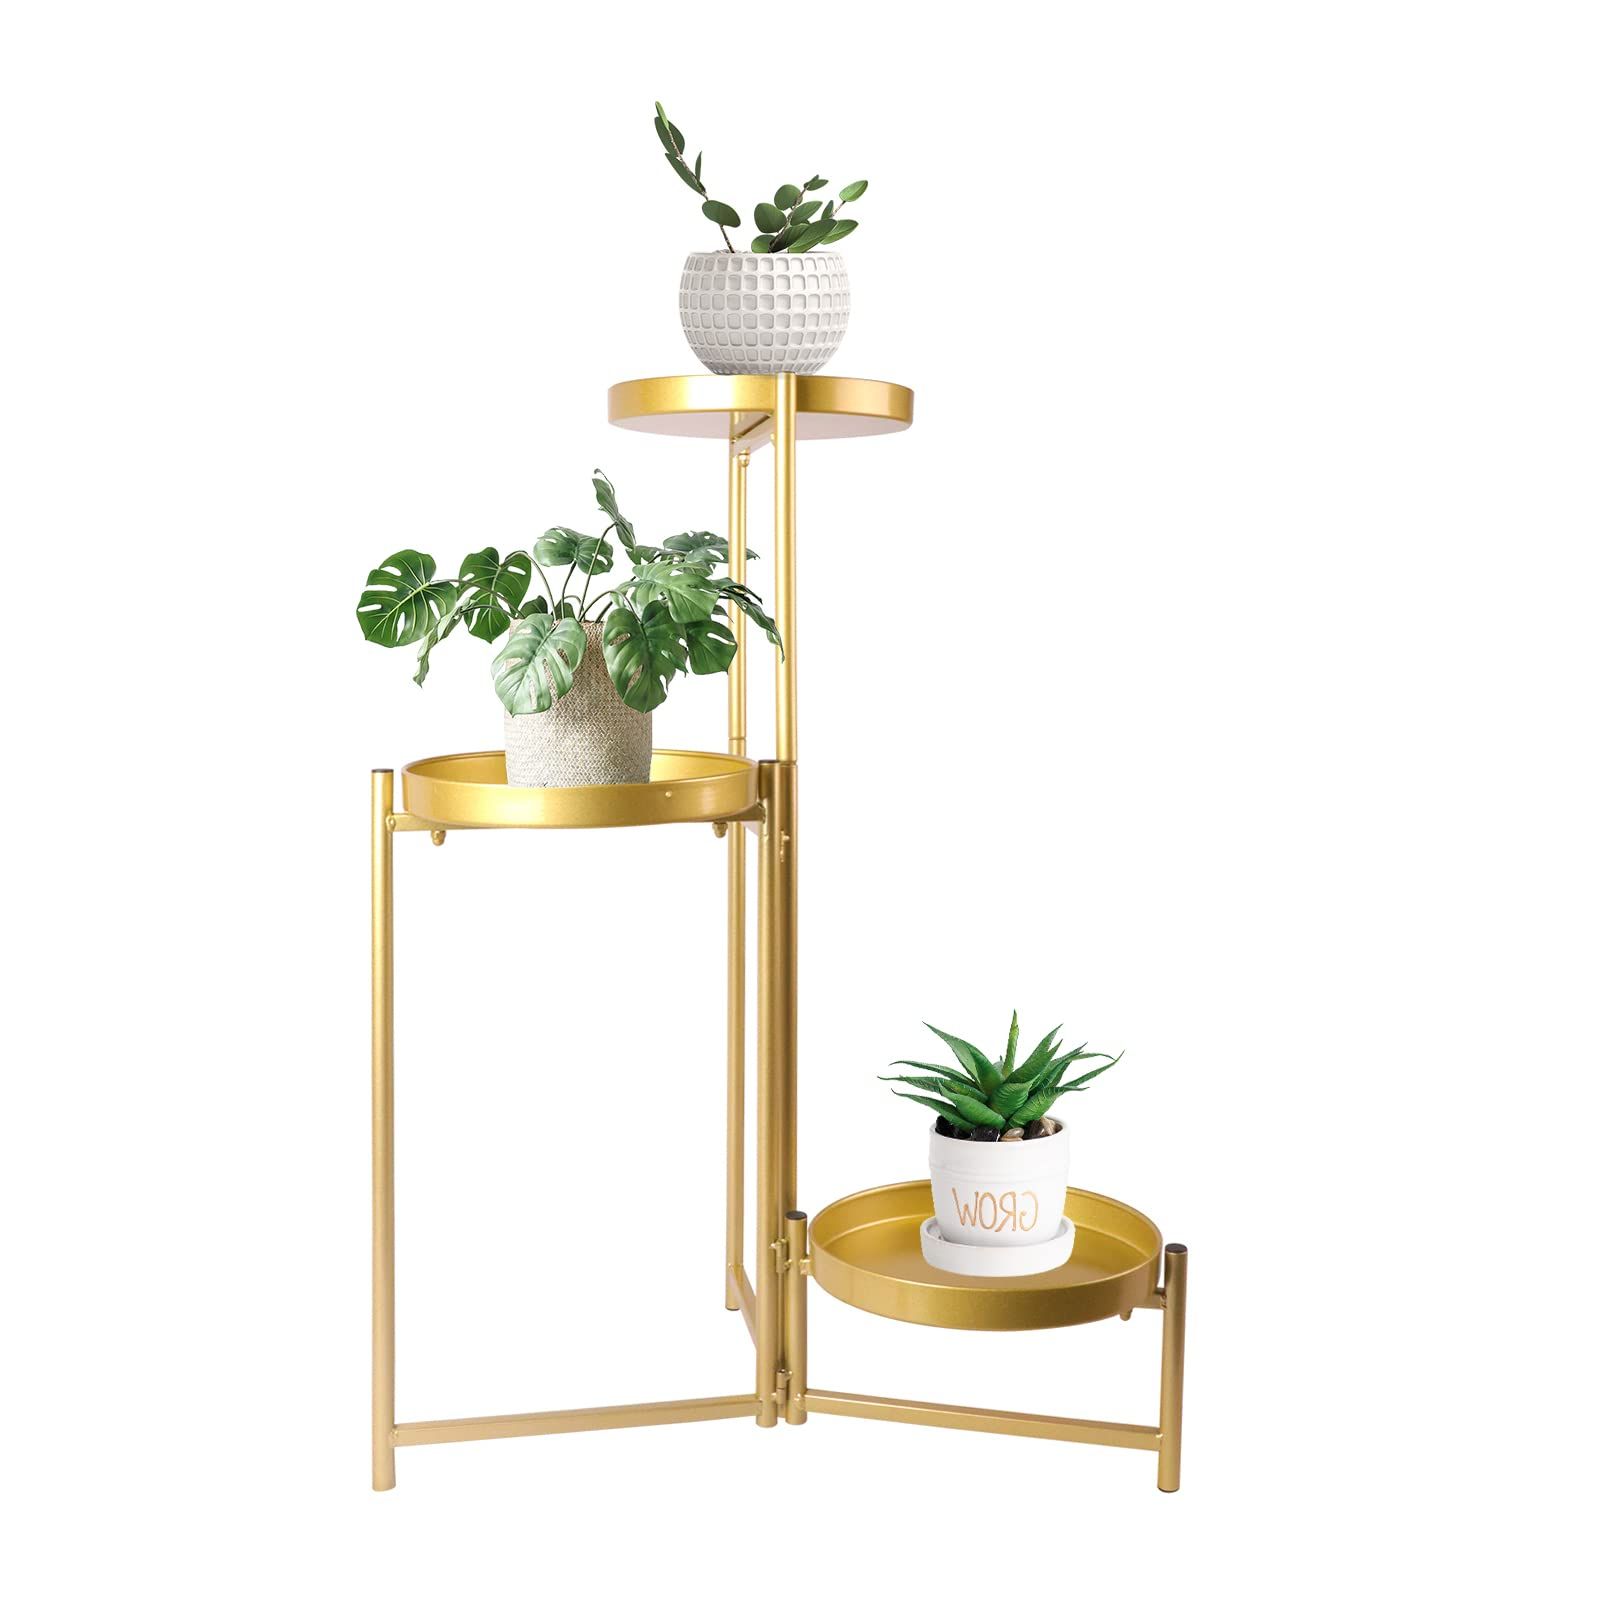 Gold Plant Stands With Regard To Recent Bigtree 3 Tier Metal Plant Stand, Foldable Indoor Outdoor Plant Shelf  Planter Display Stand For Patio Garden, Living Room, Corner, Balcony And  Bedroom (gold) (View 5 of 10)